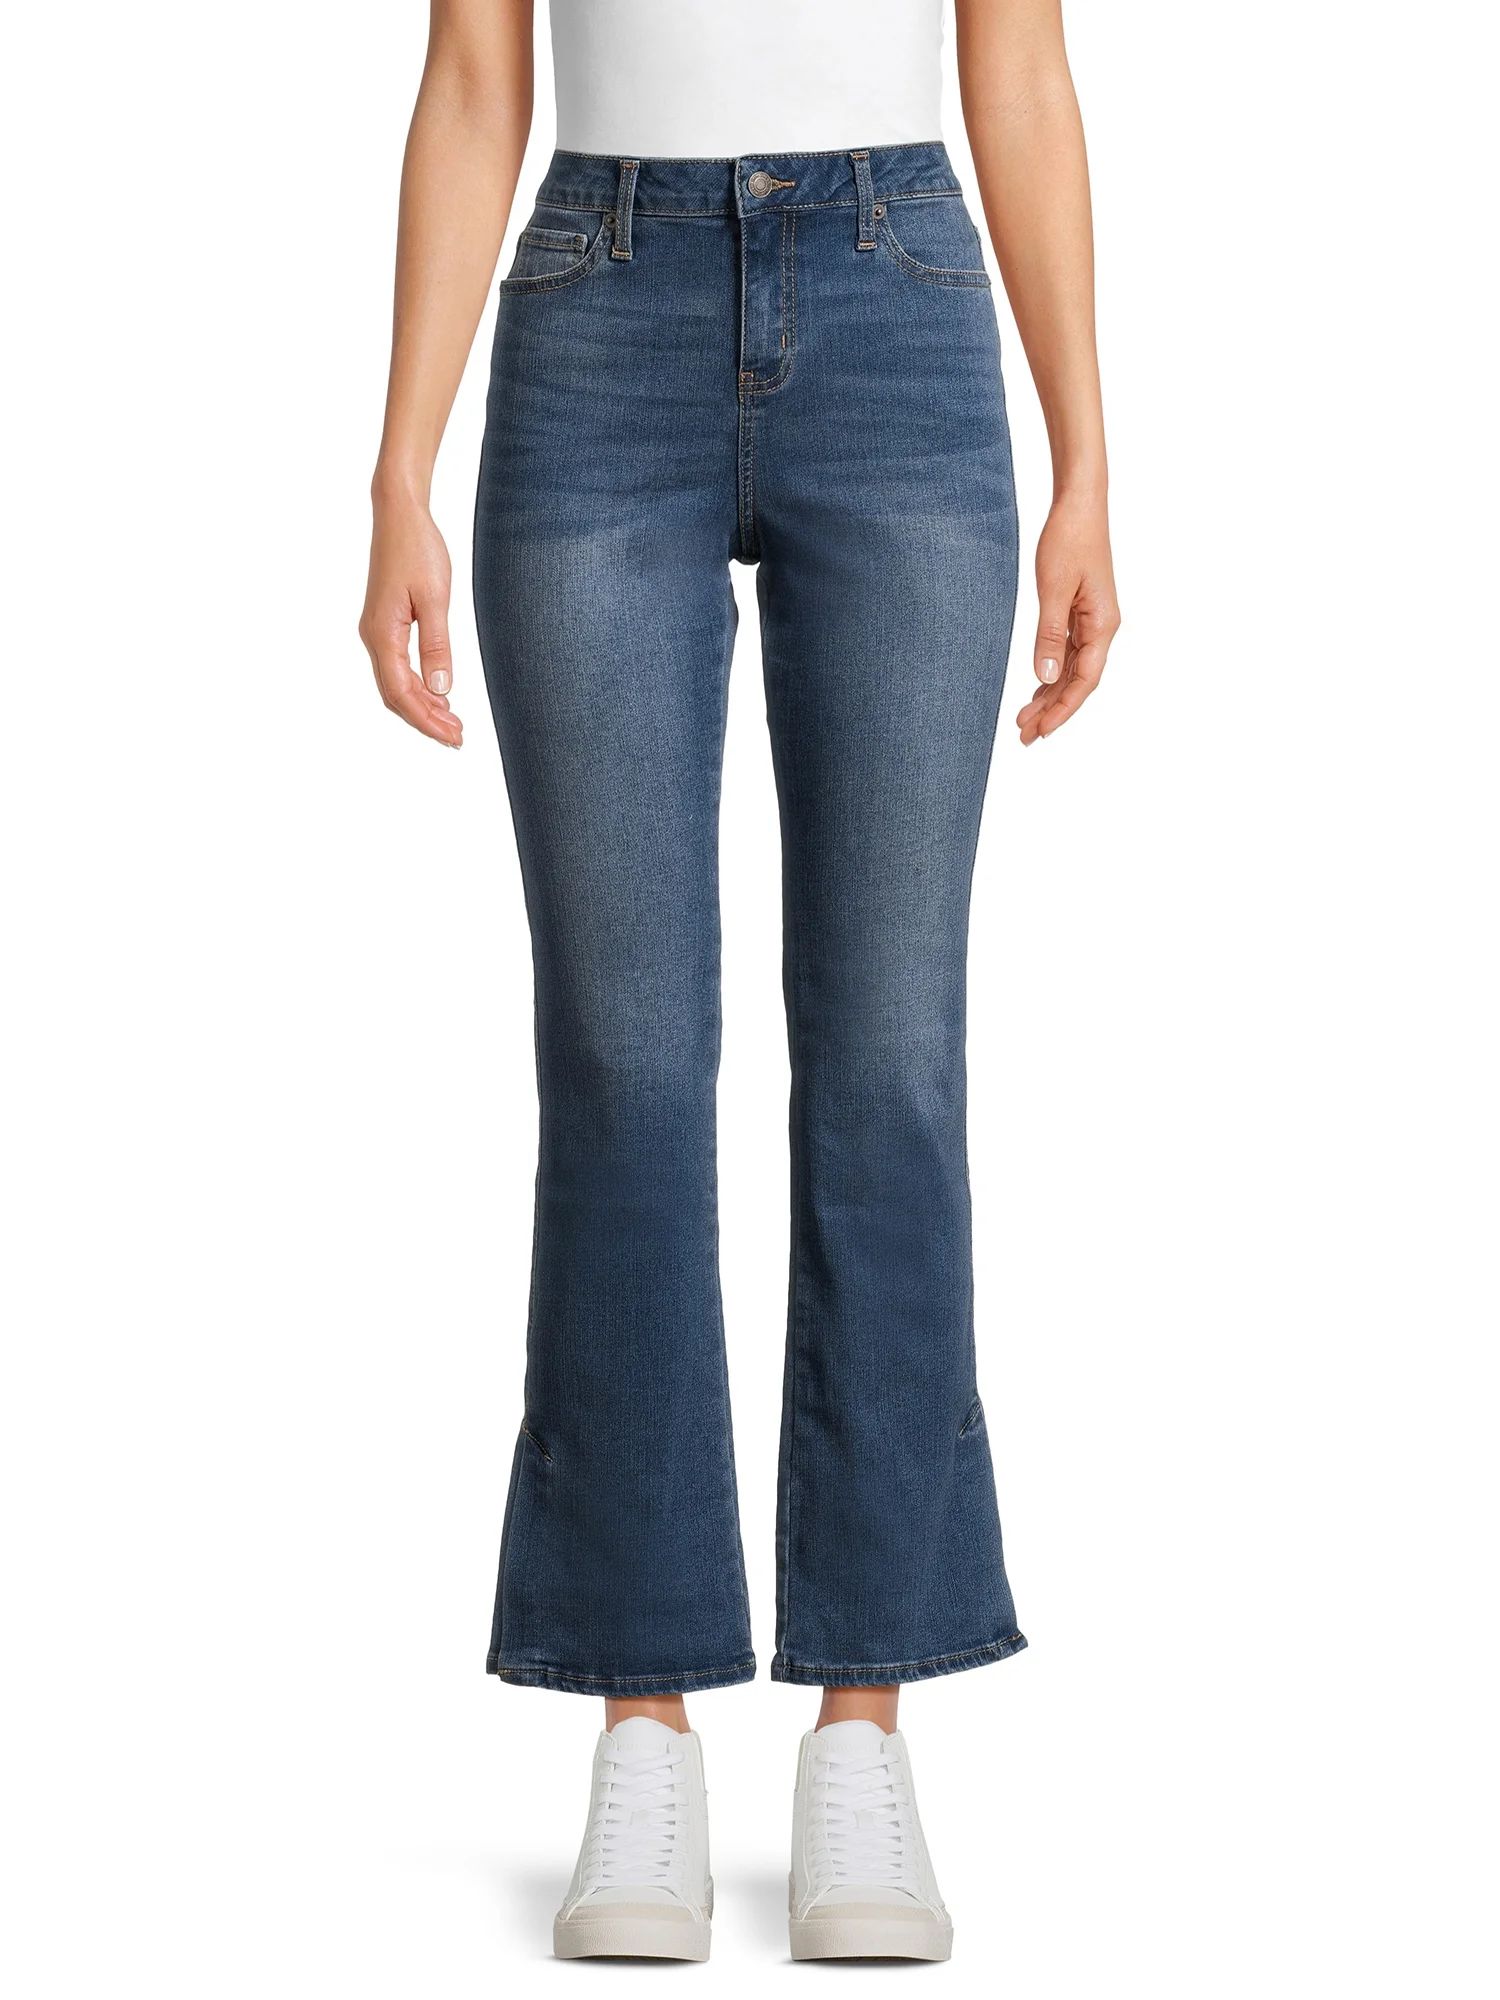 Time and Tru Women's Mid Rise Bootcut Jeans, 31" Inseam, sizes 2-20 | Walmart (US)